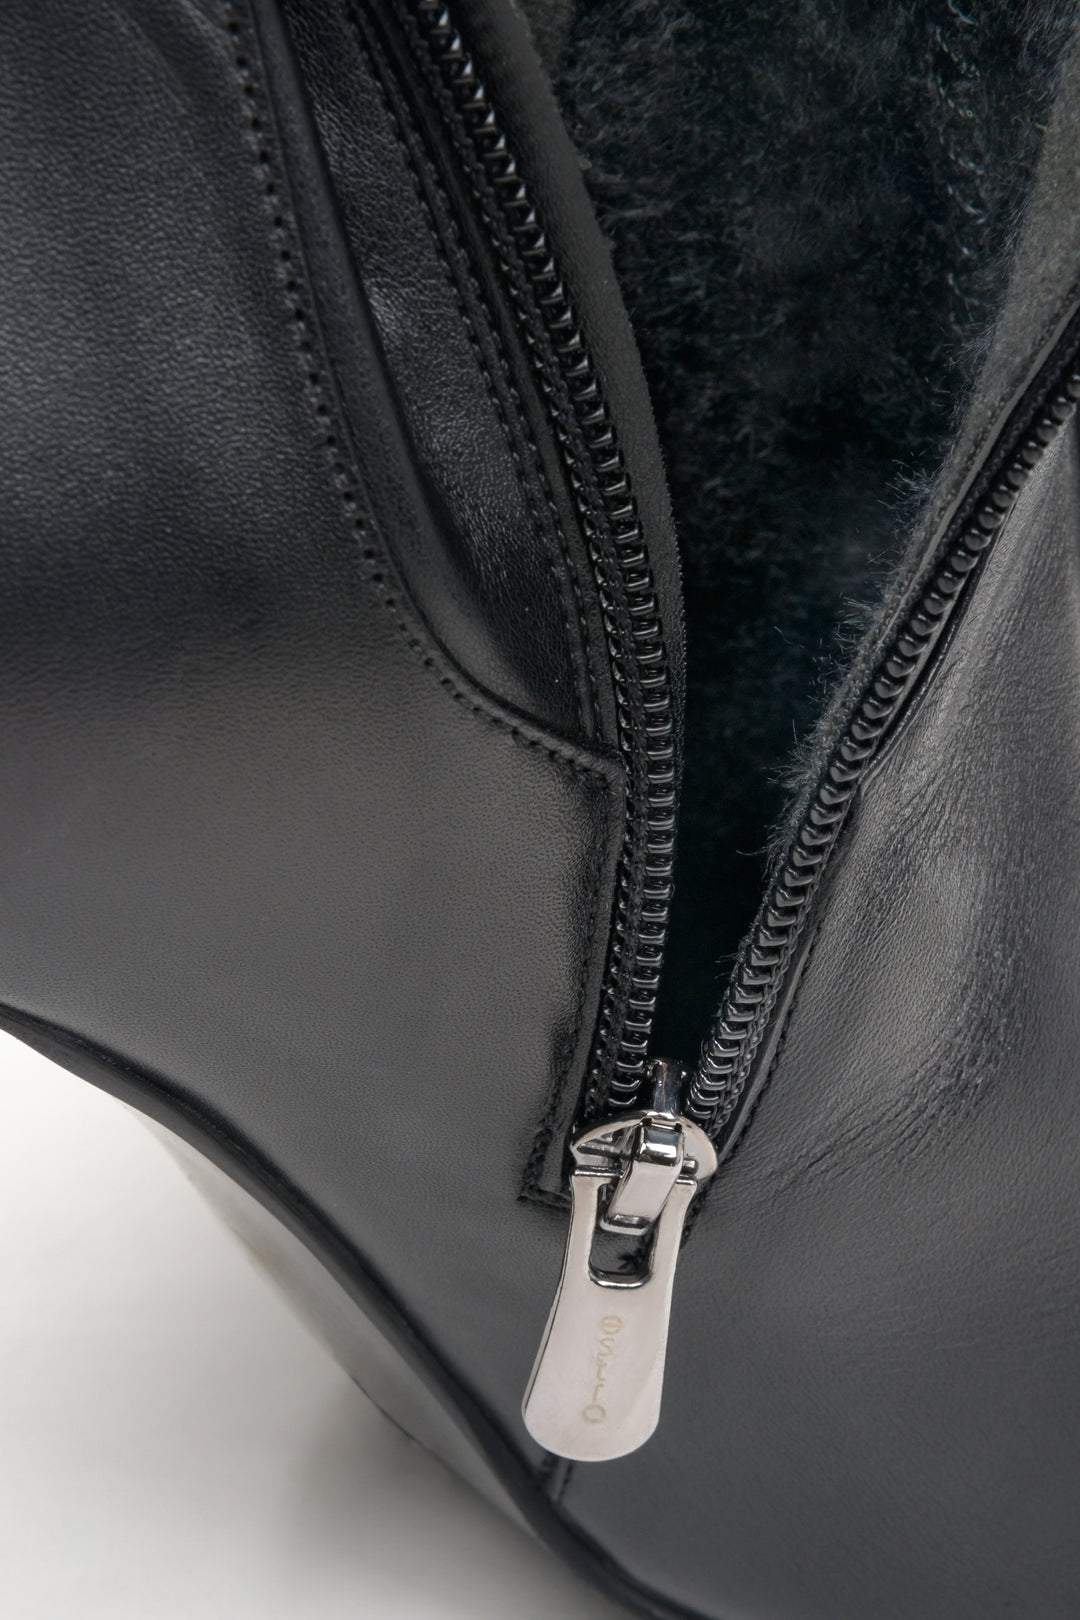 Black leather knee-high heeled boots - a close-up on fastening.